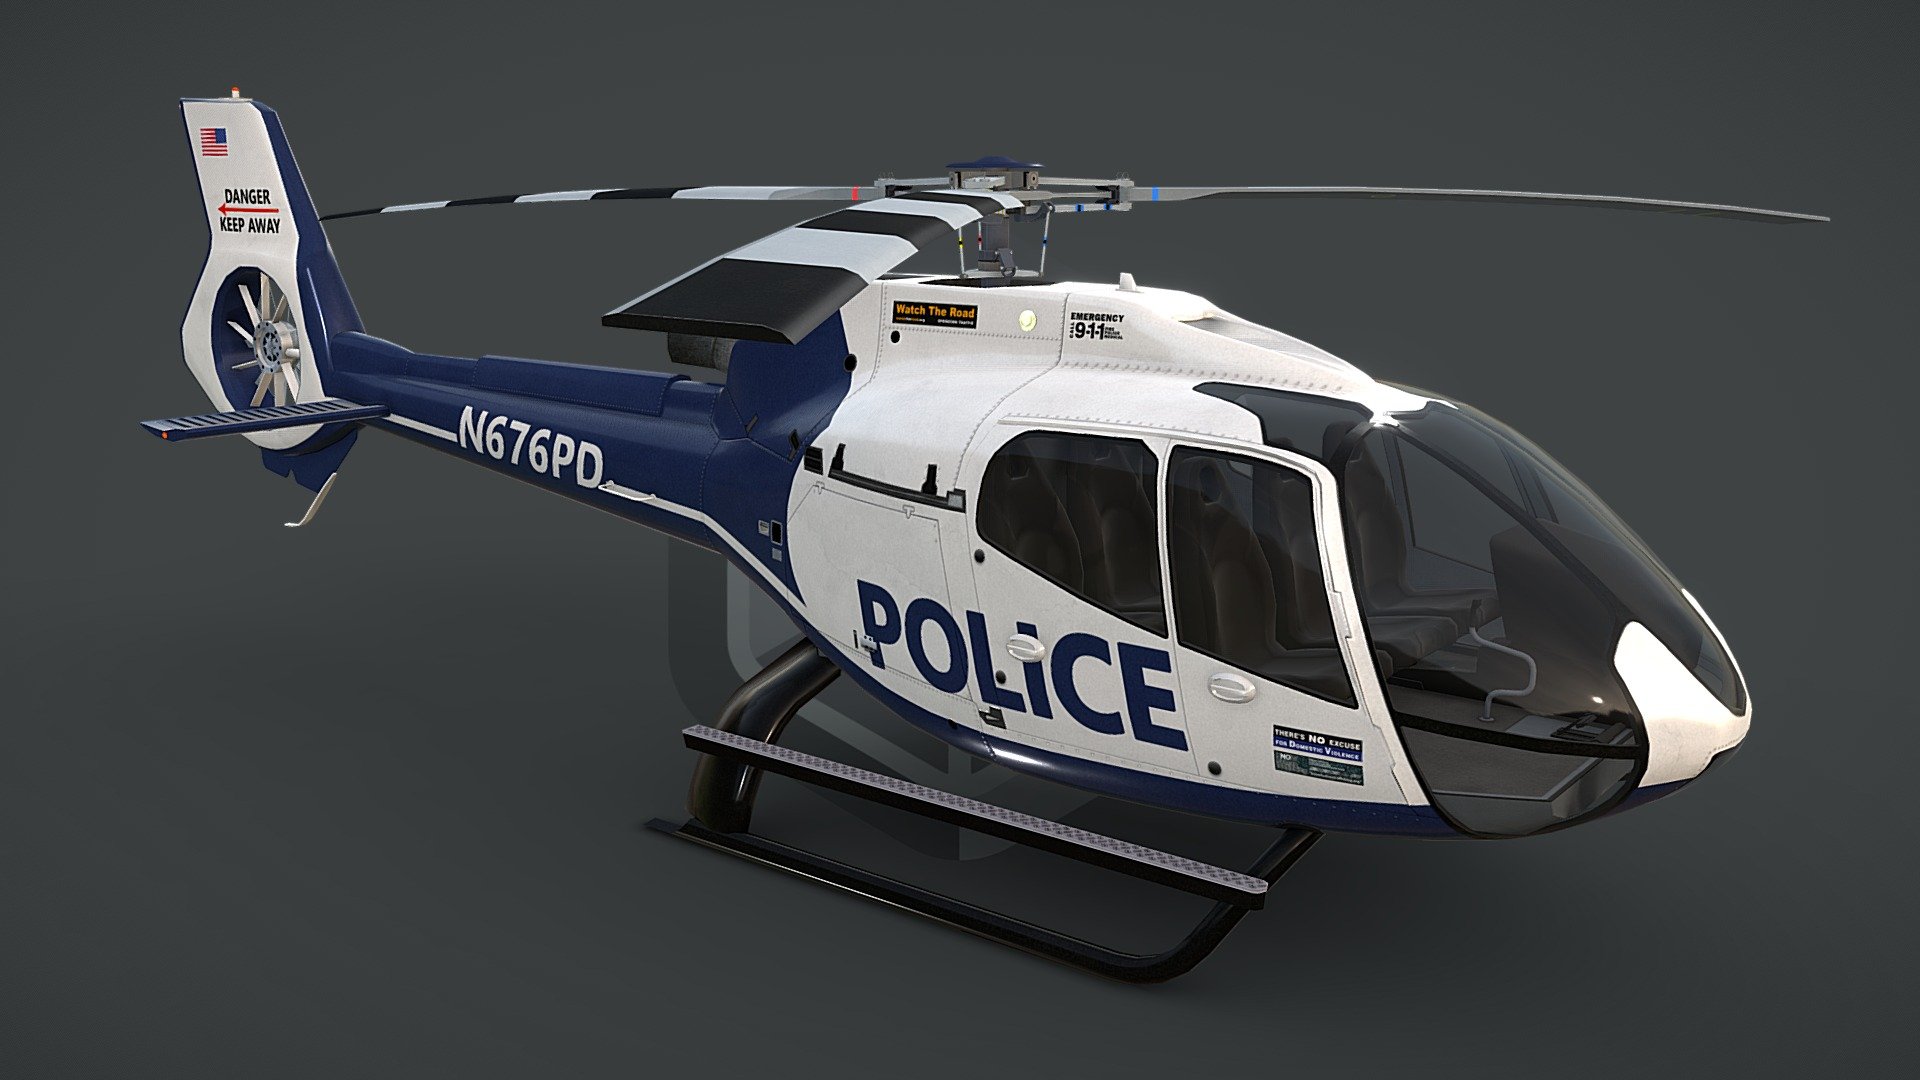 game ready, realtime optimized game asset

unique livery and branding

both PBR workflows ready

LOD0 is HQ lowpoly with bended top rotor, all lights objects and interior

LOD0 19710 tris, LOD1 10462 tris, LOD2 7388 tris, LOD3 5990 tris

100% triangulated and 100% unwrapped non-overlapping

5 x uv layouts, body, HQ rotors, LQ rotors, interior, lights

made using blueprints, real world scale meters

all rotors detached and animable in each LOD with properly placed pivots for flawless animations

hideable capsule built interior that fits perfectly the body

interior is simple but a great basis for further elaboration

big textures pack with native 4096 x 4096 px textures for body, rotors, interior

LOD3 rotors have own textures with blades on alpha channel

light objects have own, small, textures, and contain an emission map

pack contains native .max scene, created in 3dsmax 2014

pack contains clean and flawless FBX and OBJ files

each LOD and all LOD together exported in each file format
 - Police Helicopter EC130-H130 Livery 7 - Buy Royalty Free 3D model by CGAmp 3d model